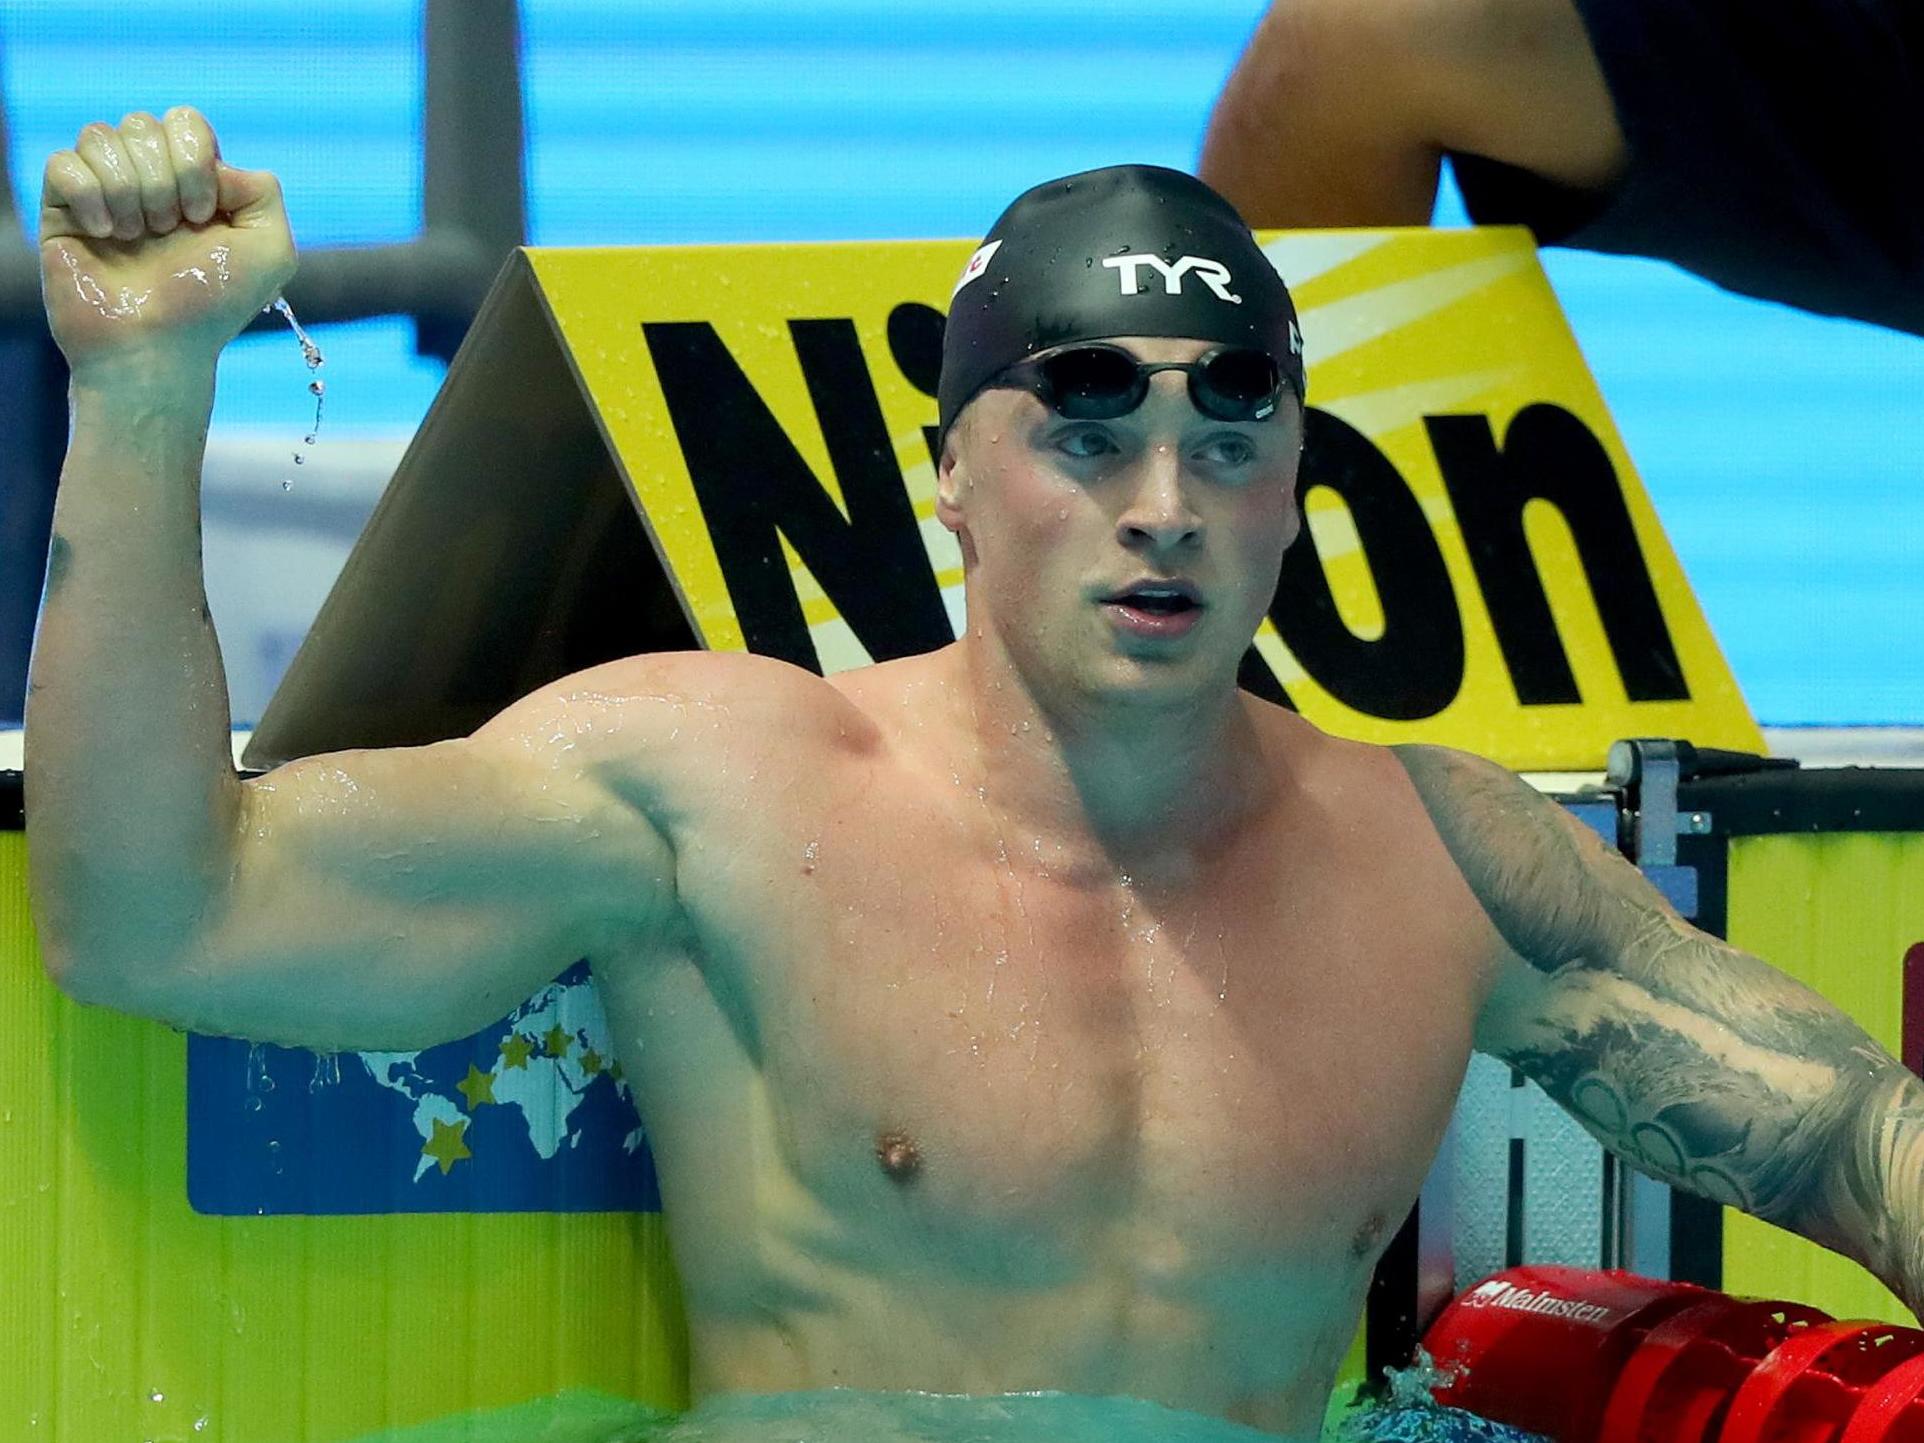 Adam Peaty becomes a 1st man to swim under 57 sec in the 100m breaststroke